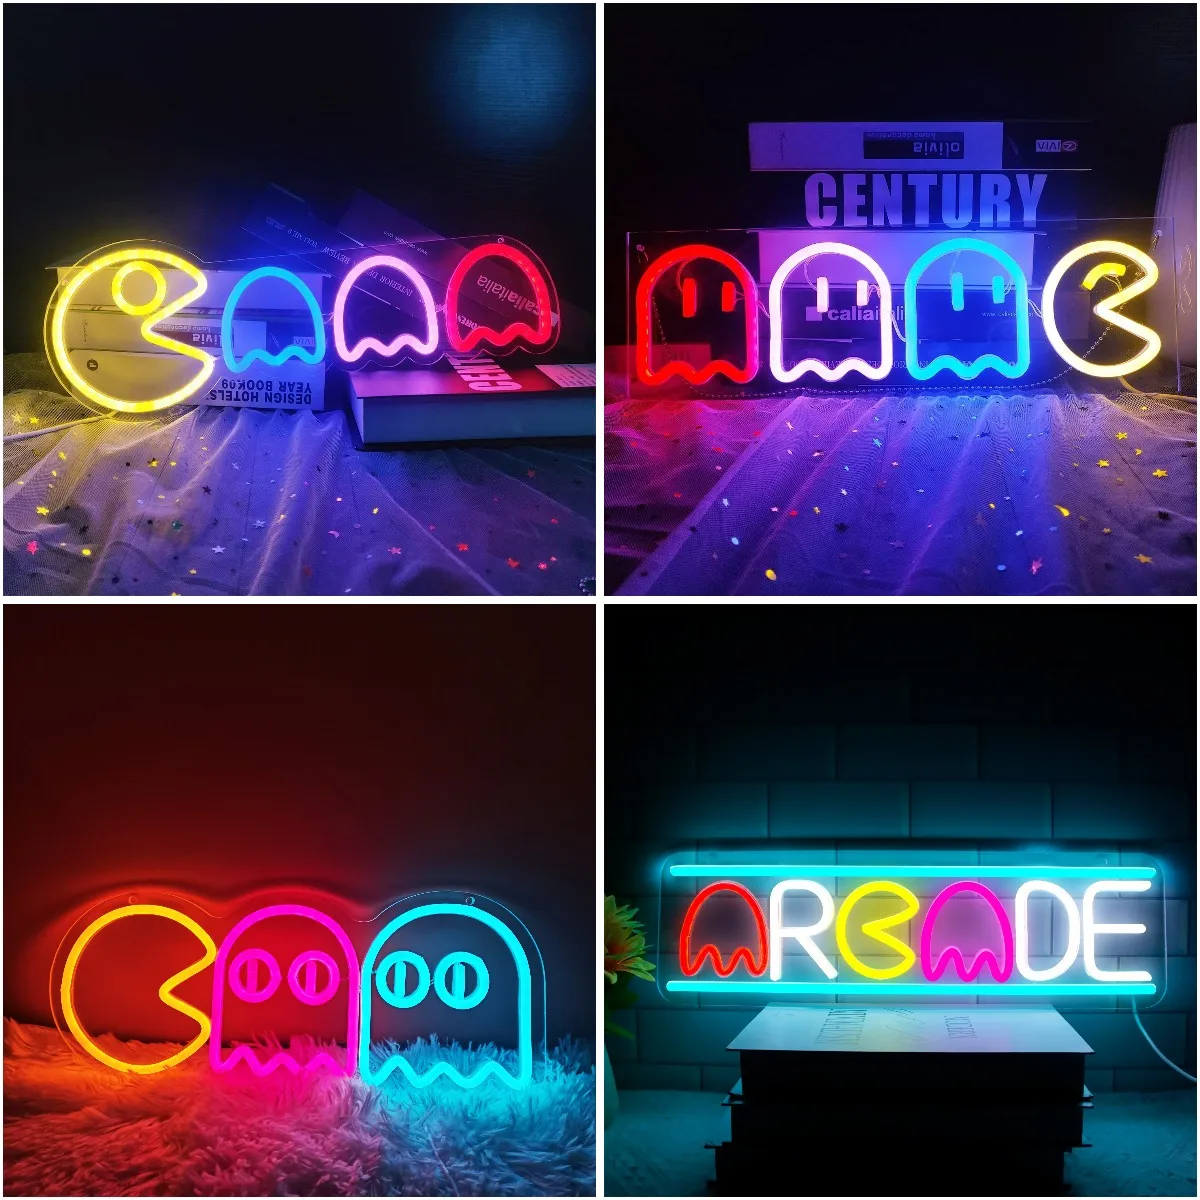 

Game Neon Signs Ghost Neon Lights Led Sign Decor Arcade Game Room Decor Led Wall Sign Neon Sign Christmas Wall Decor Gift